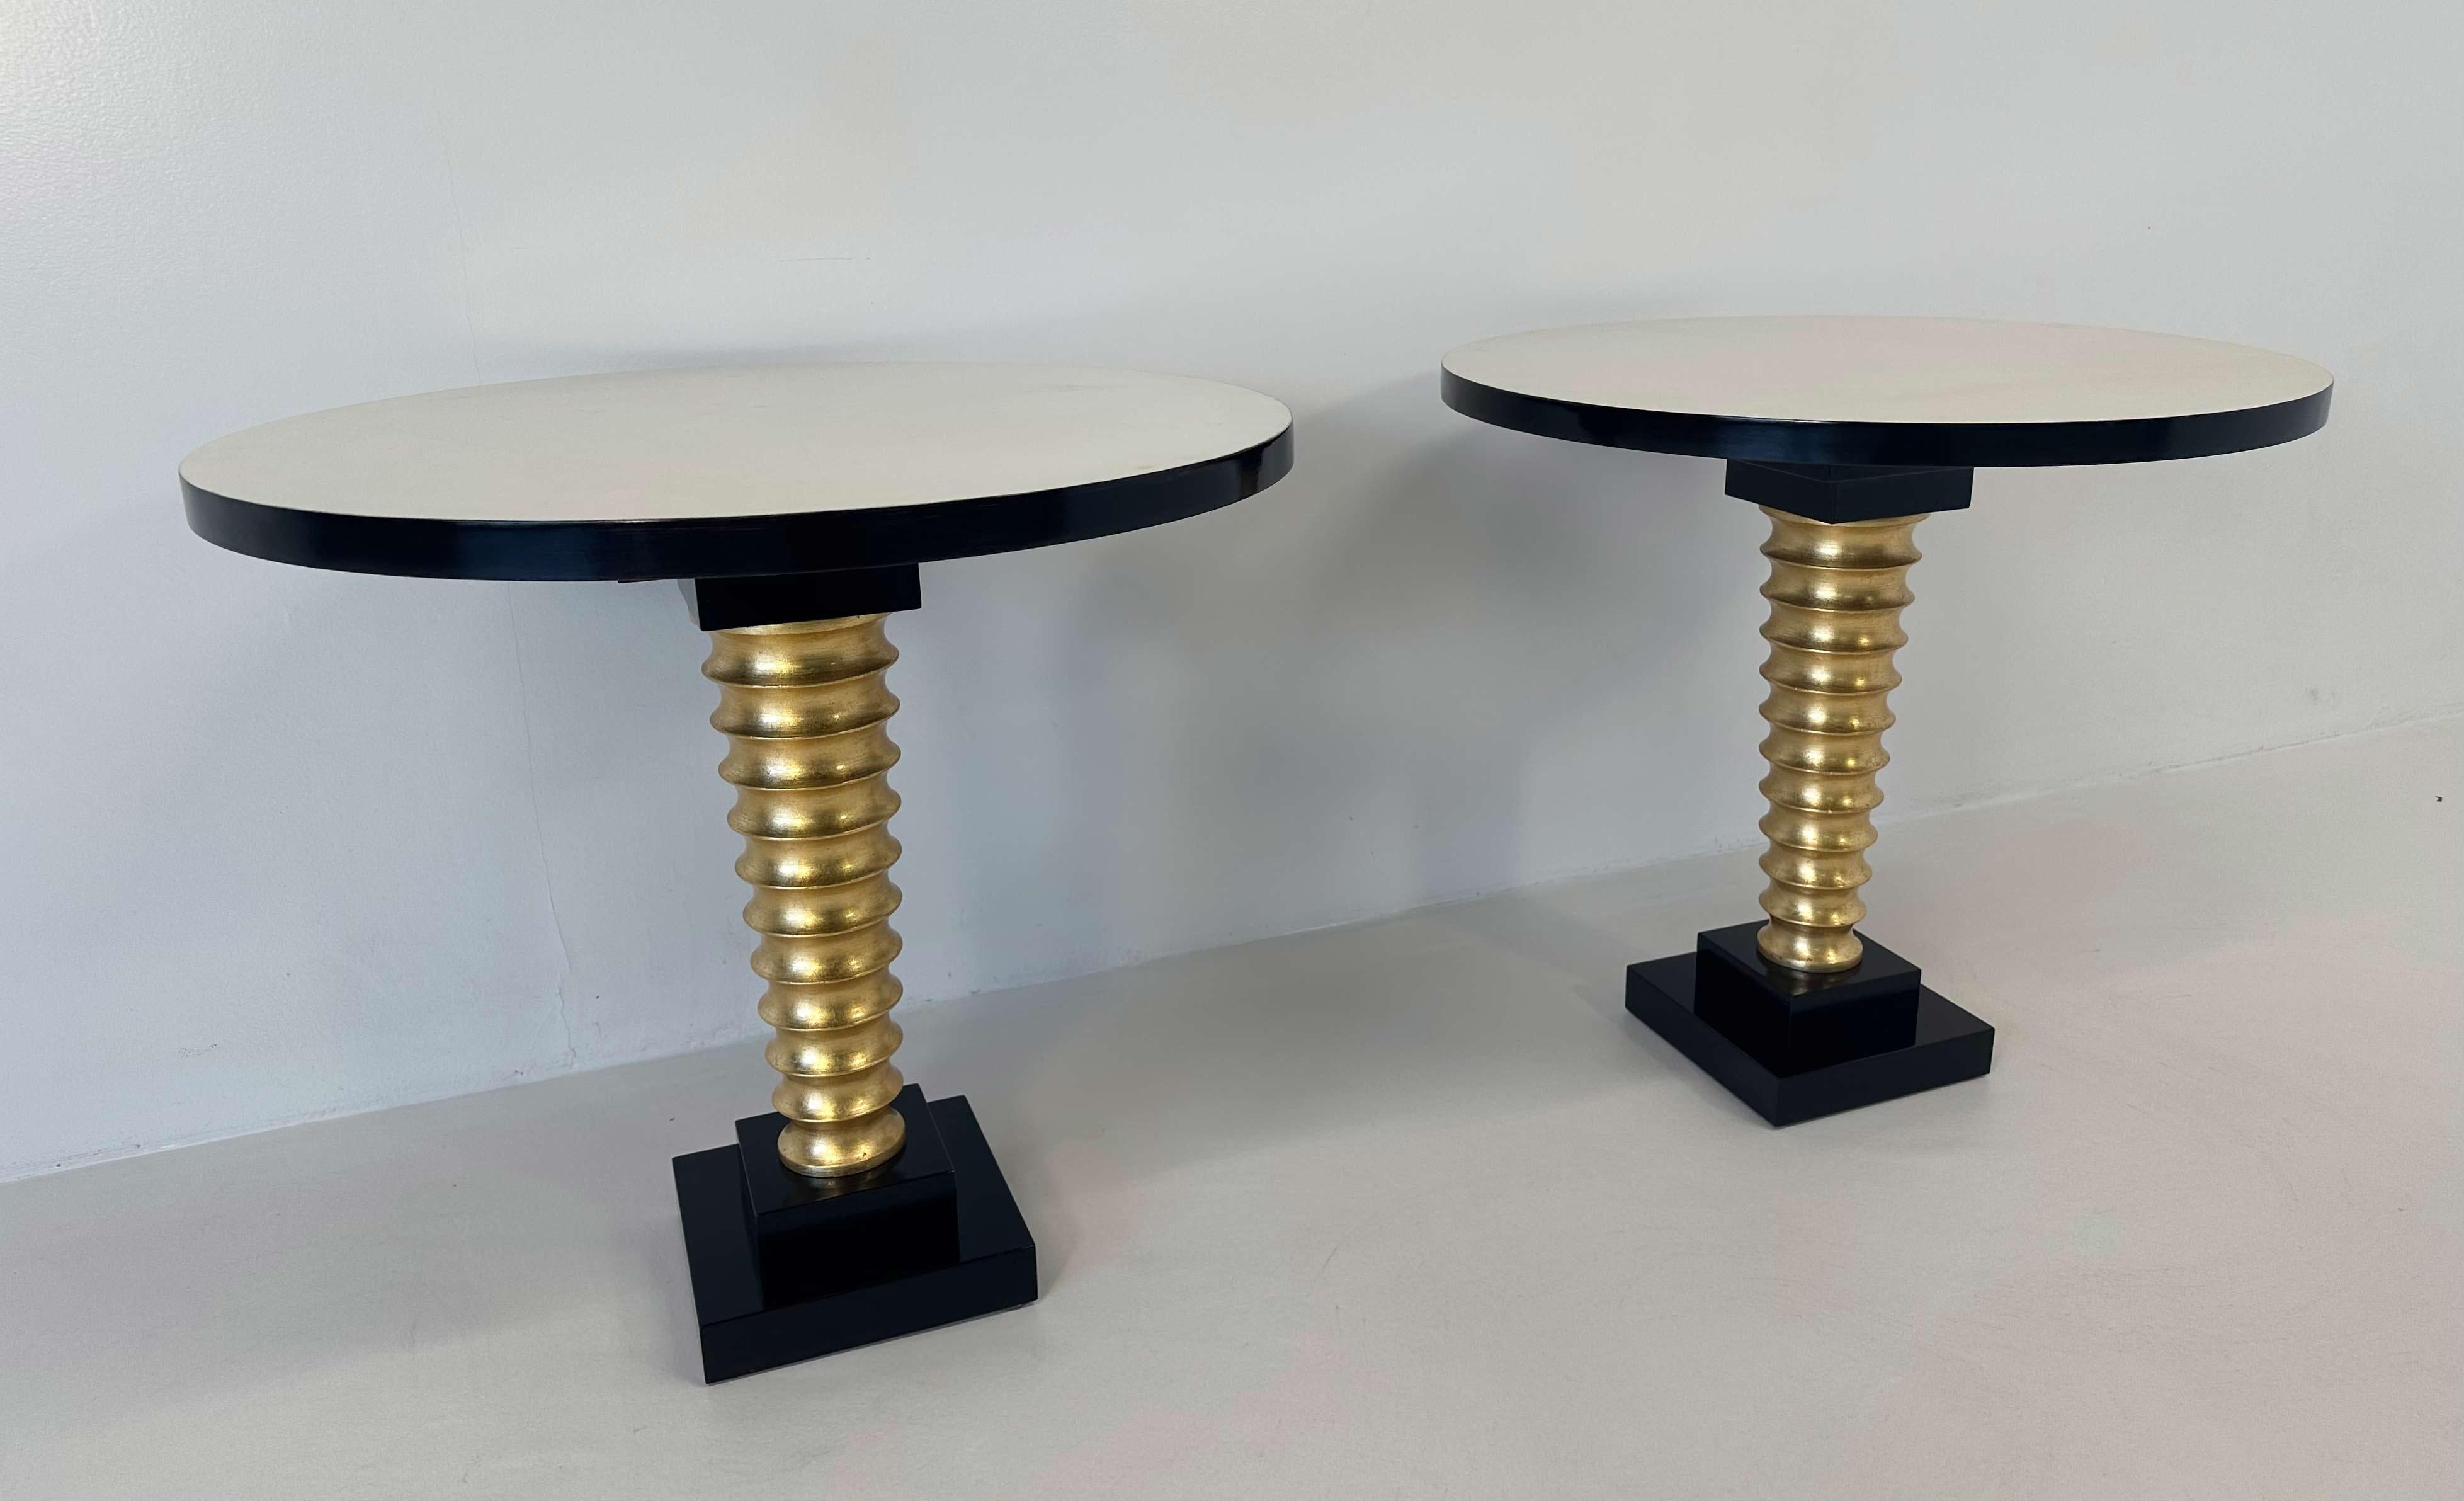 Turned Italian Art Deco Style Parchment, Gold Leaf and Black Lacquer Coffee Tables  For Sale